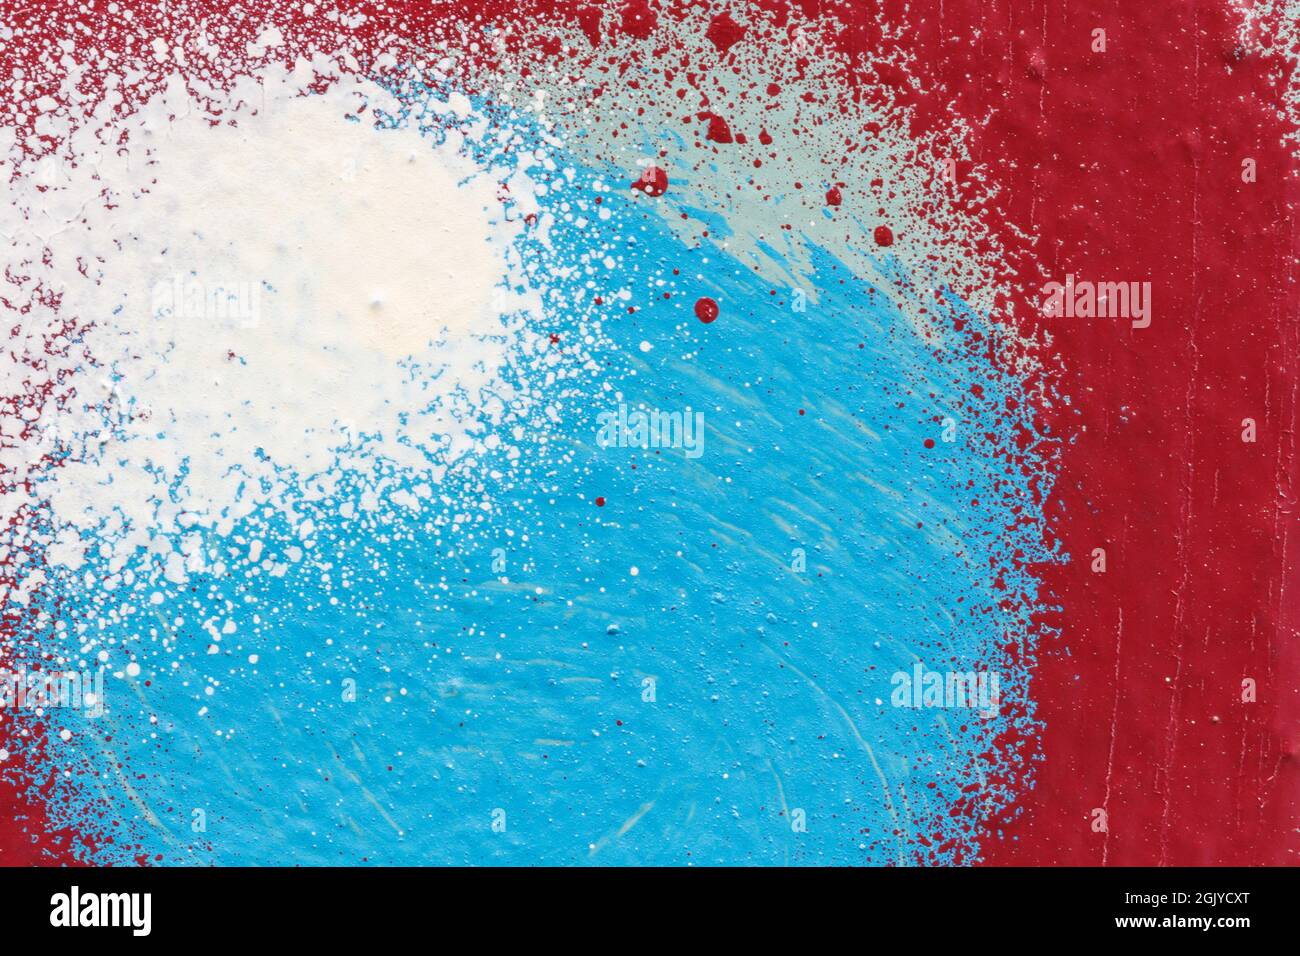 Macro close-up of white, blue and red spray paint with splashes. Abstract full frame textured splattered graffiti background with copy space. Stock Photo